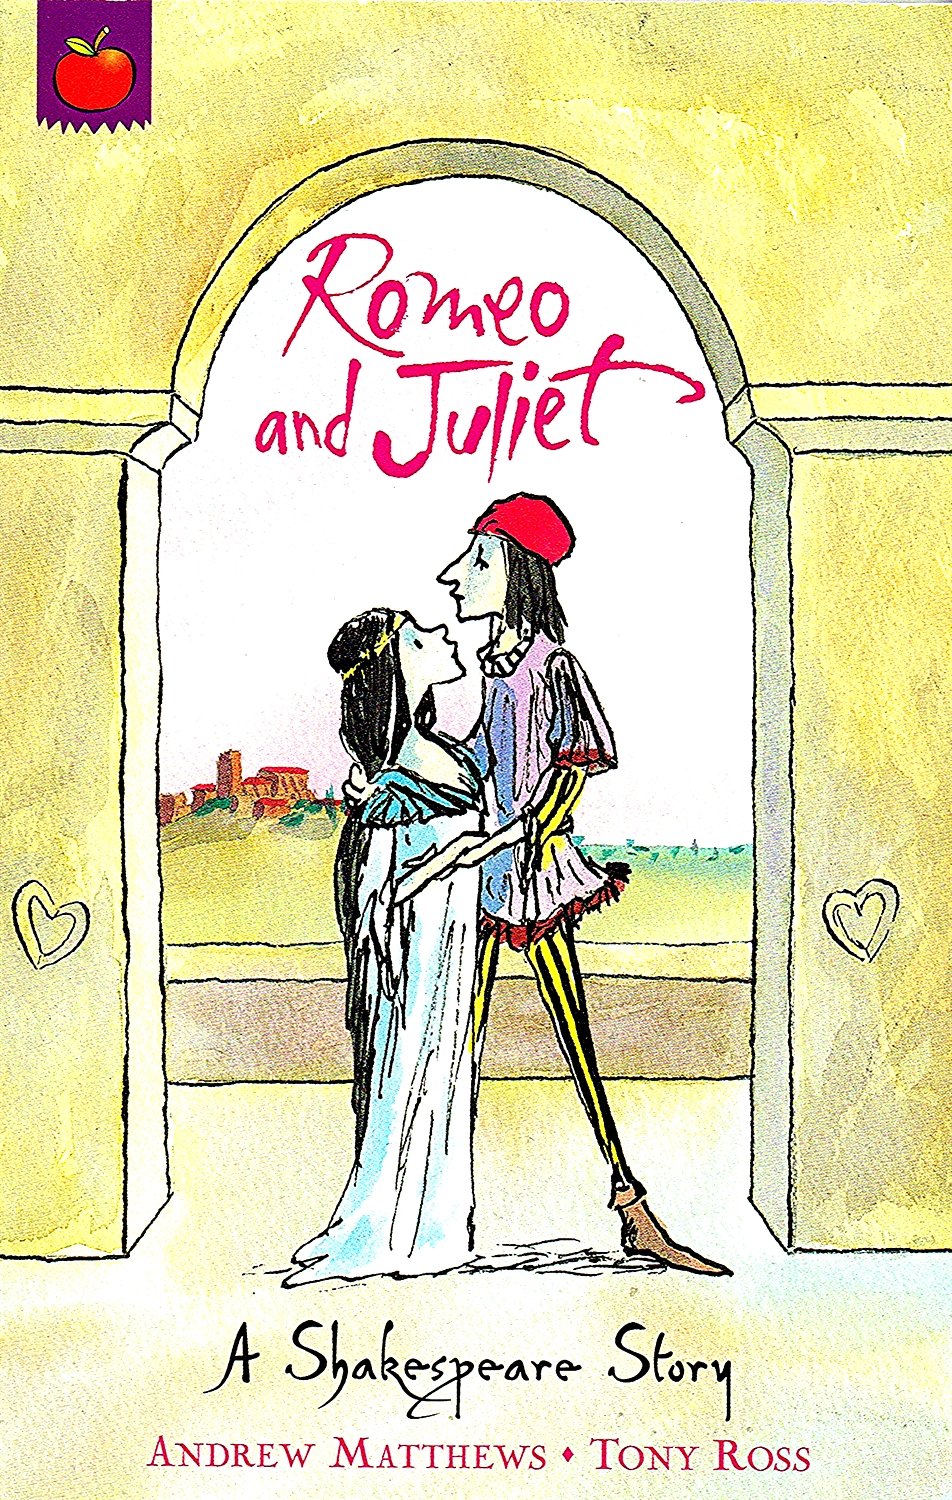 A Shakespeare story: Romeo and Juliet